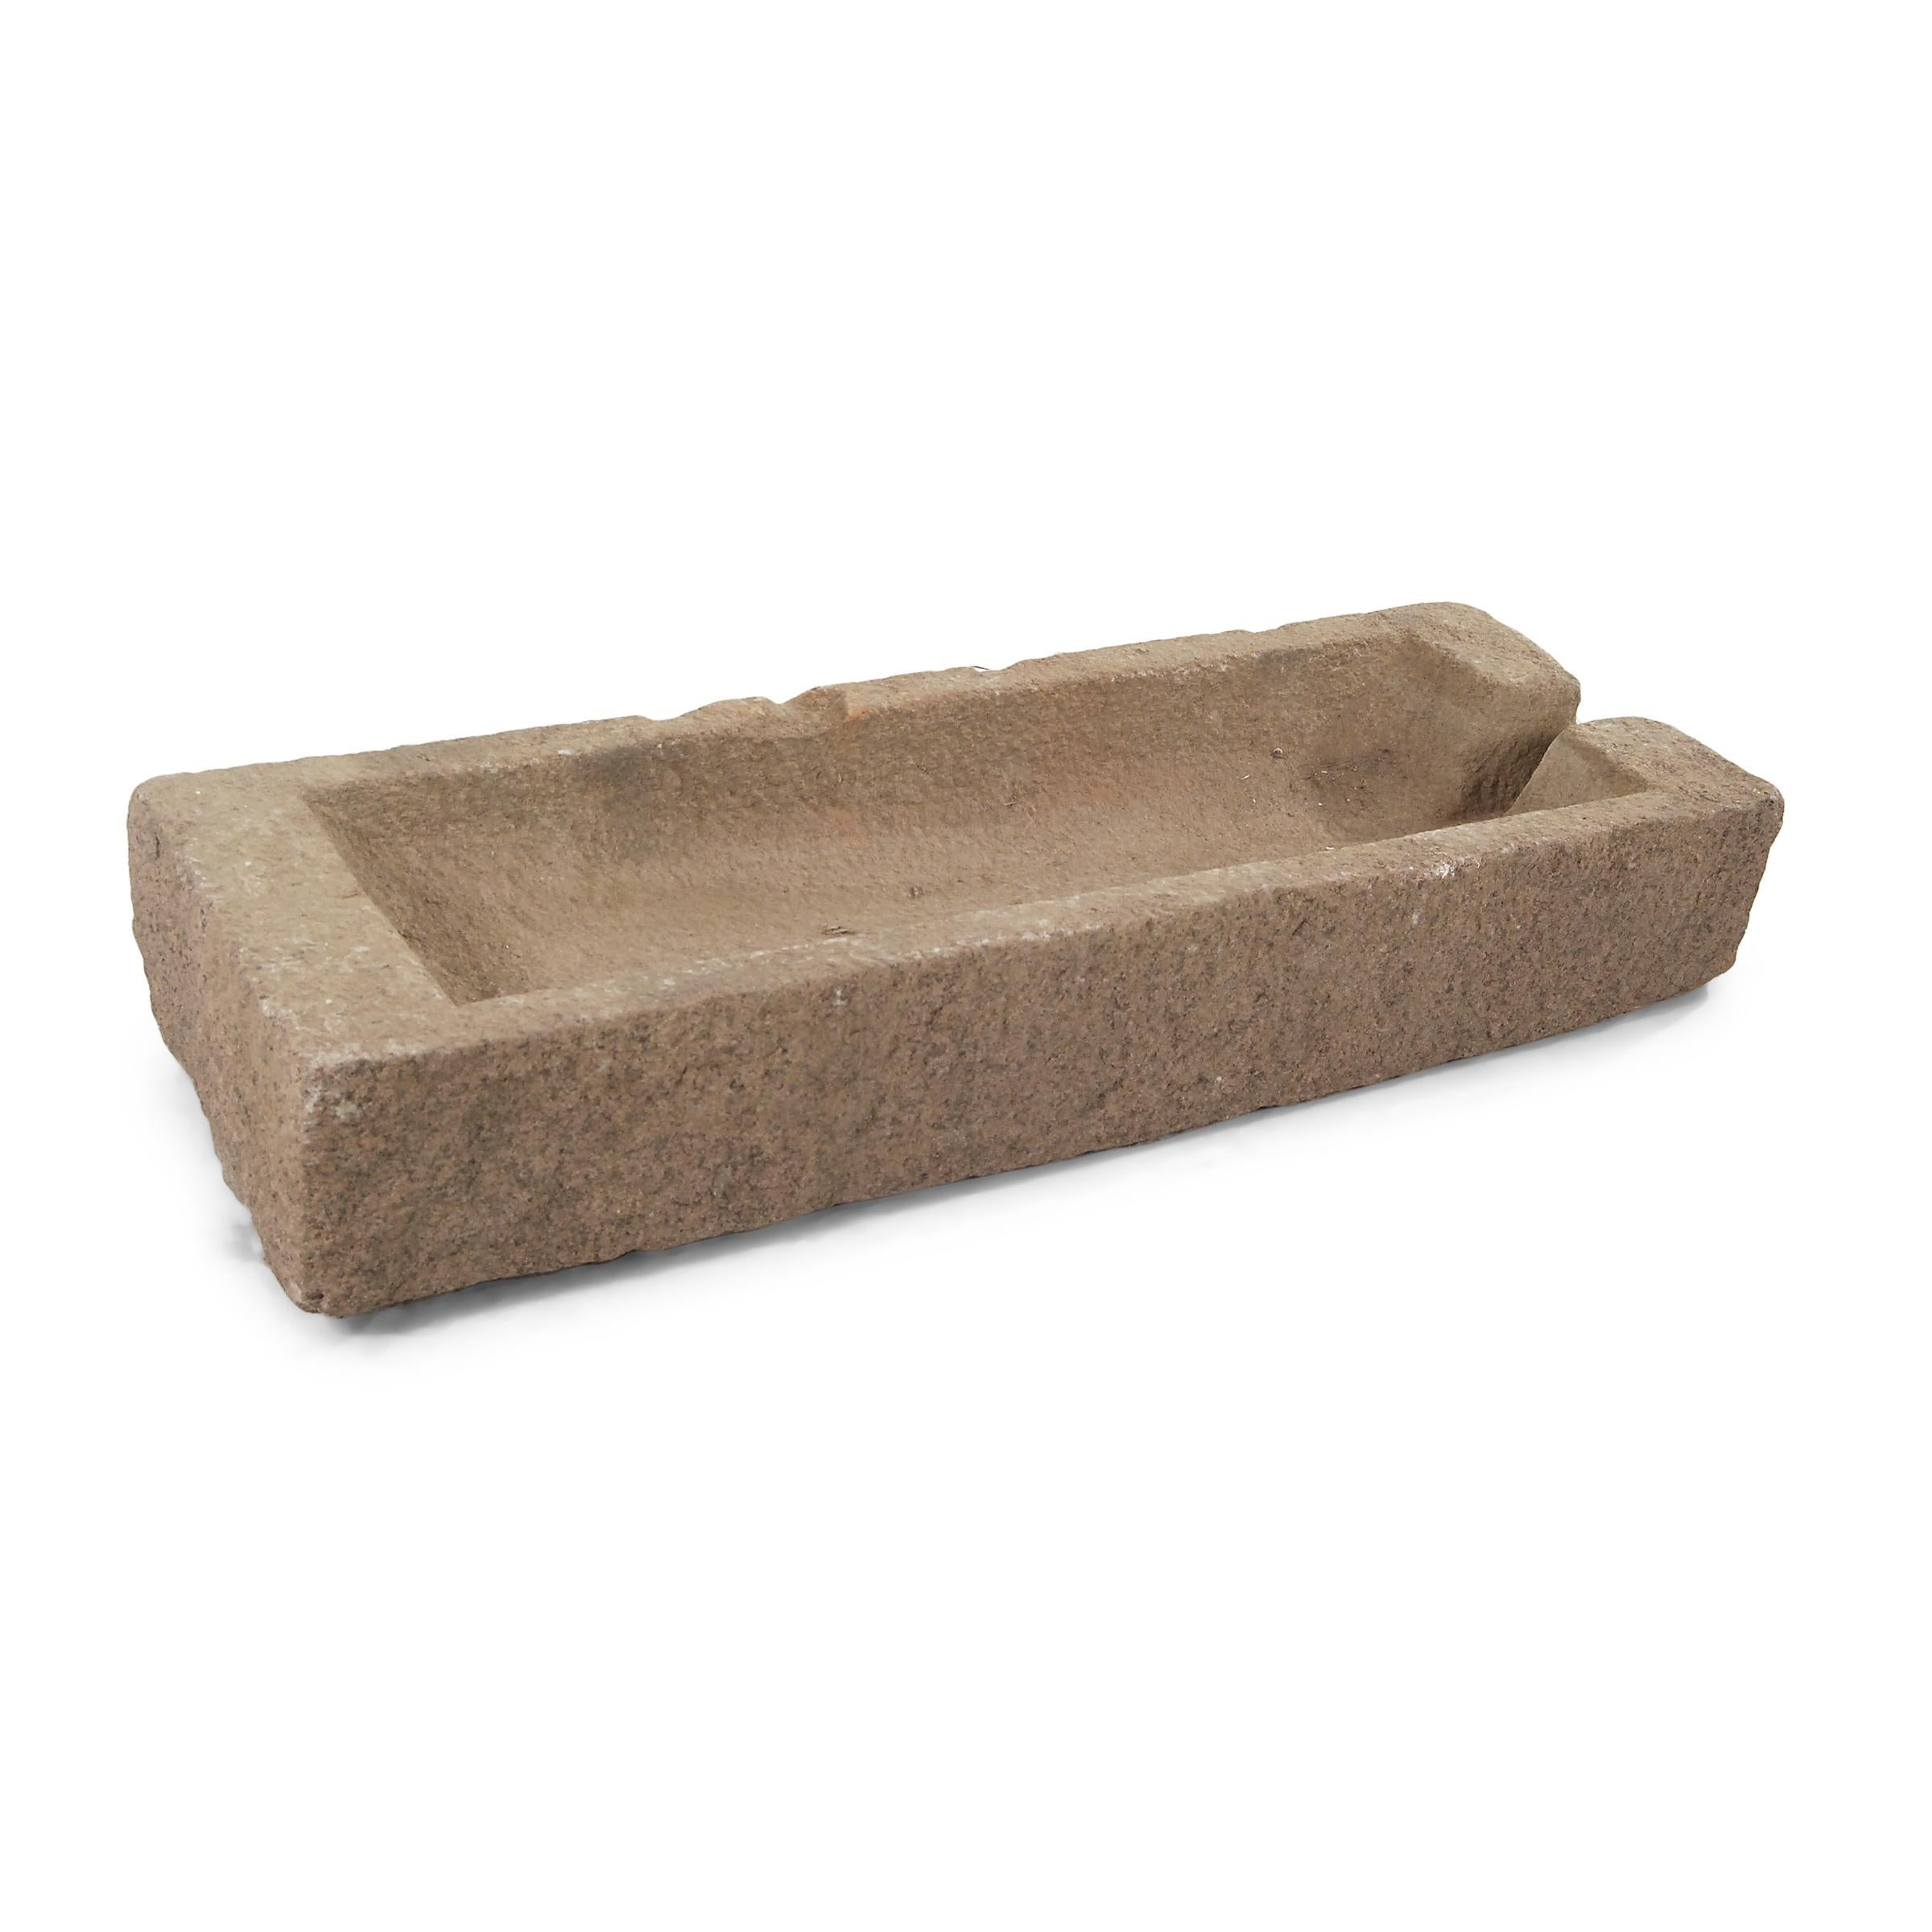 Prized mounts once took refreshment from this stone trough, carved from a solid block of limestone more than hundred years ago. Once purely functional, the trough is celebrated today for its elegant, simple form and rustic authenticity. A wonderful